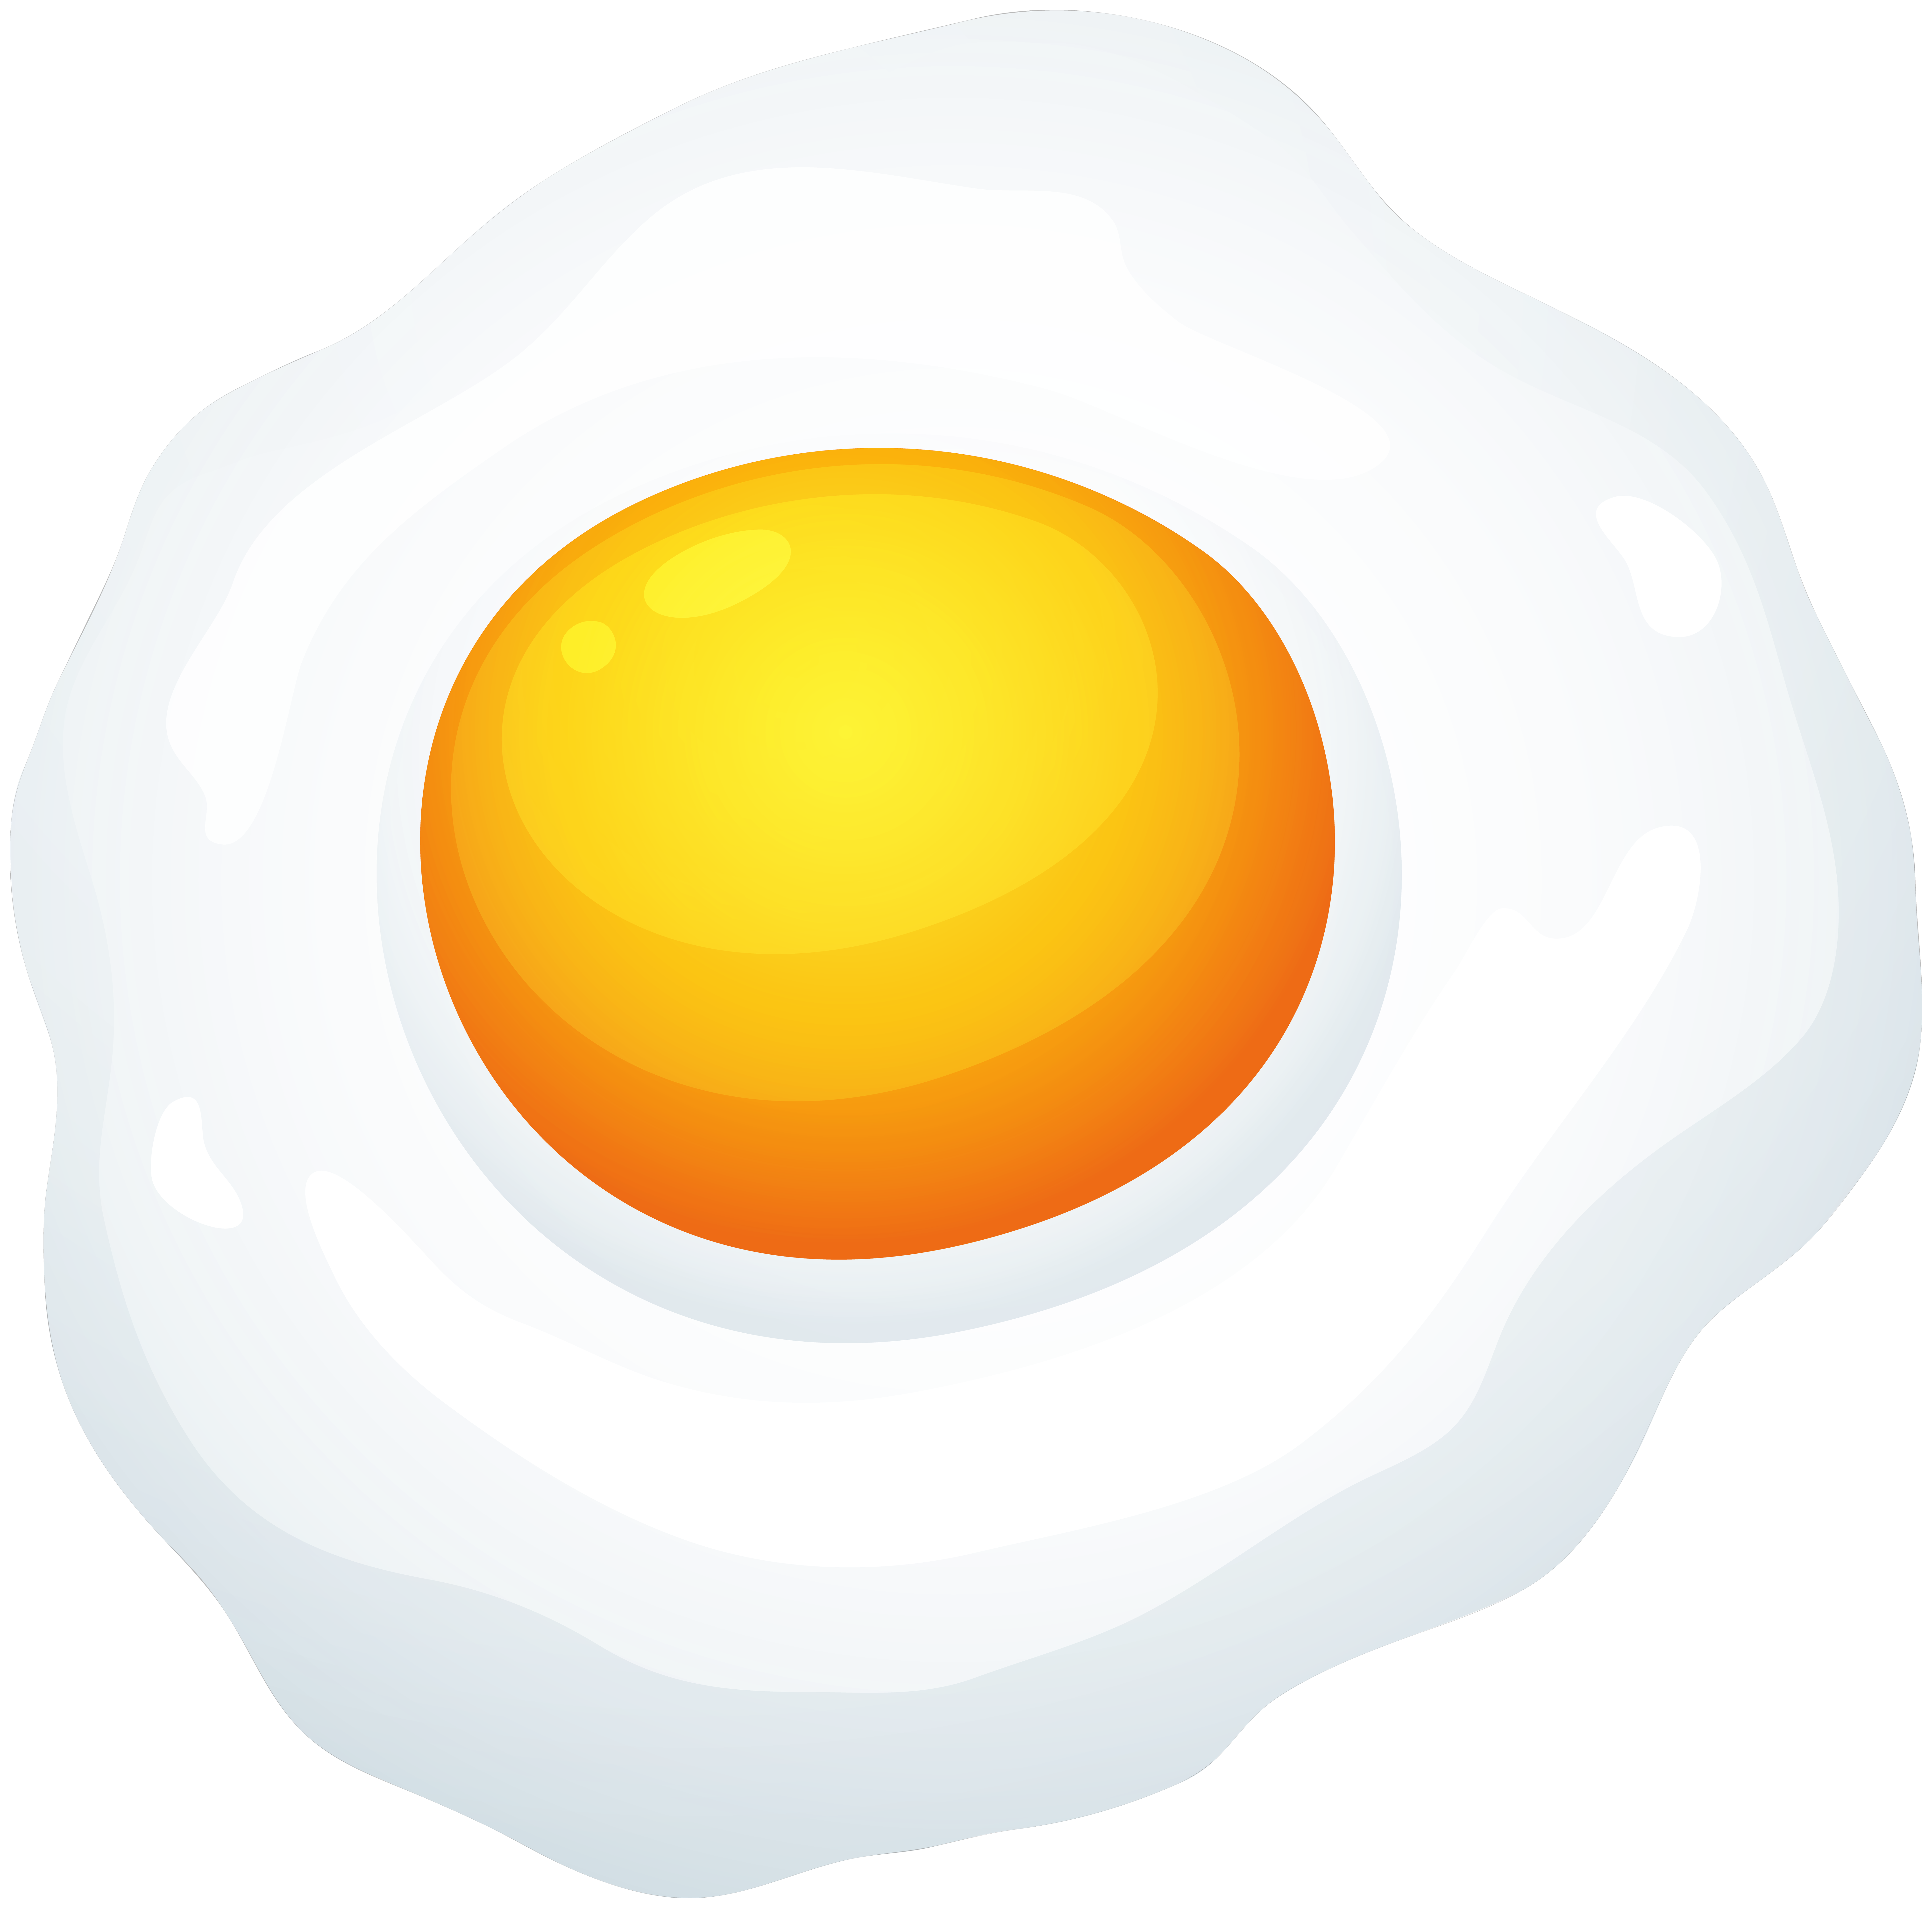 Fried Egg PNG Clip Art Image | Gallery Yopriceville - High-Quality